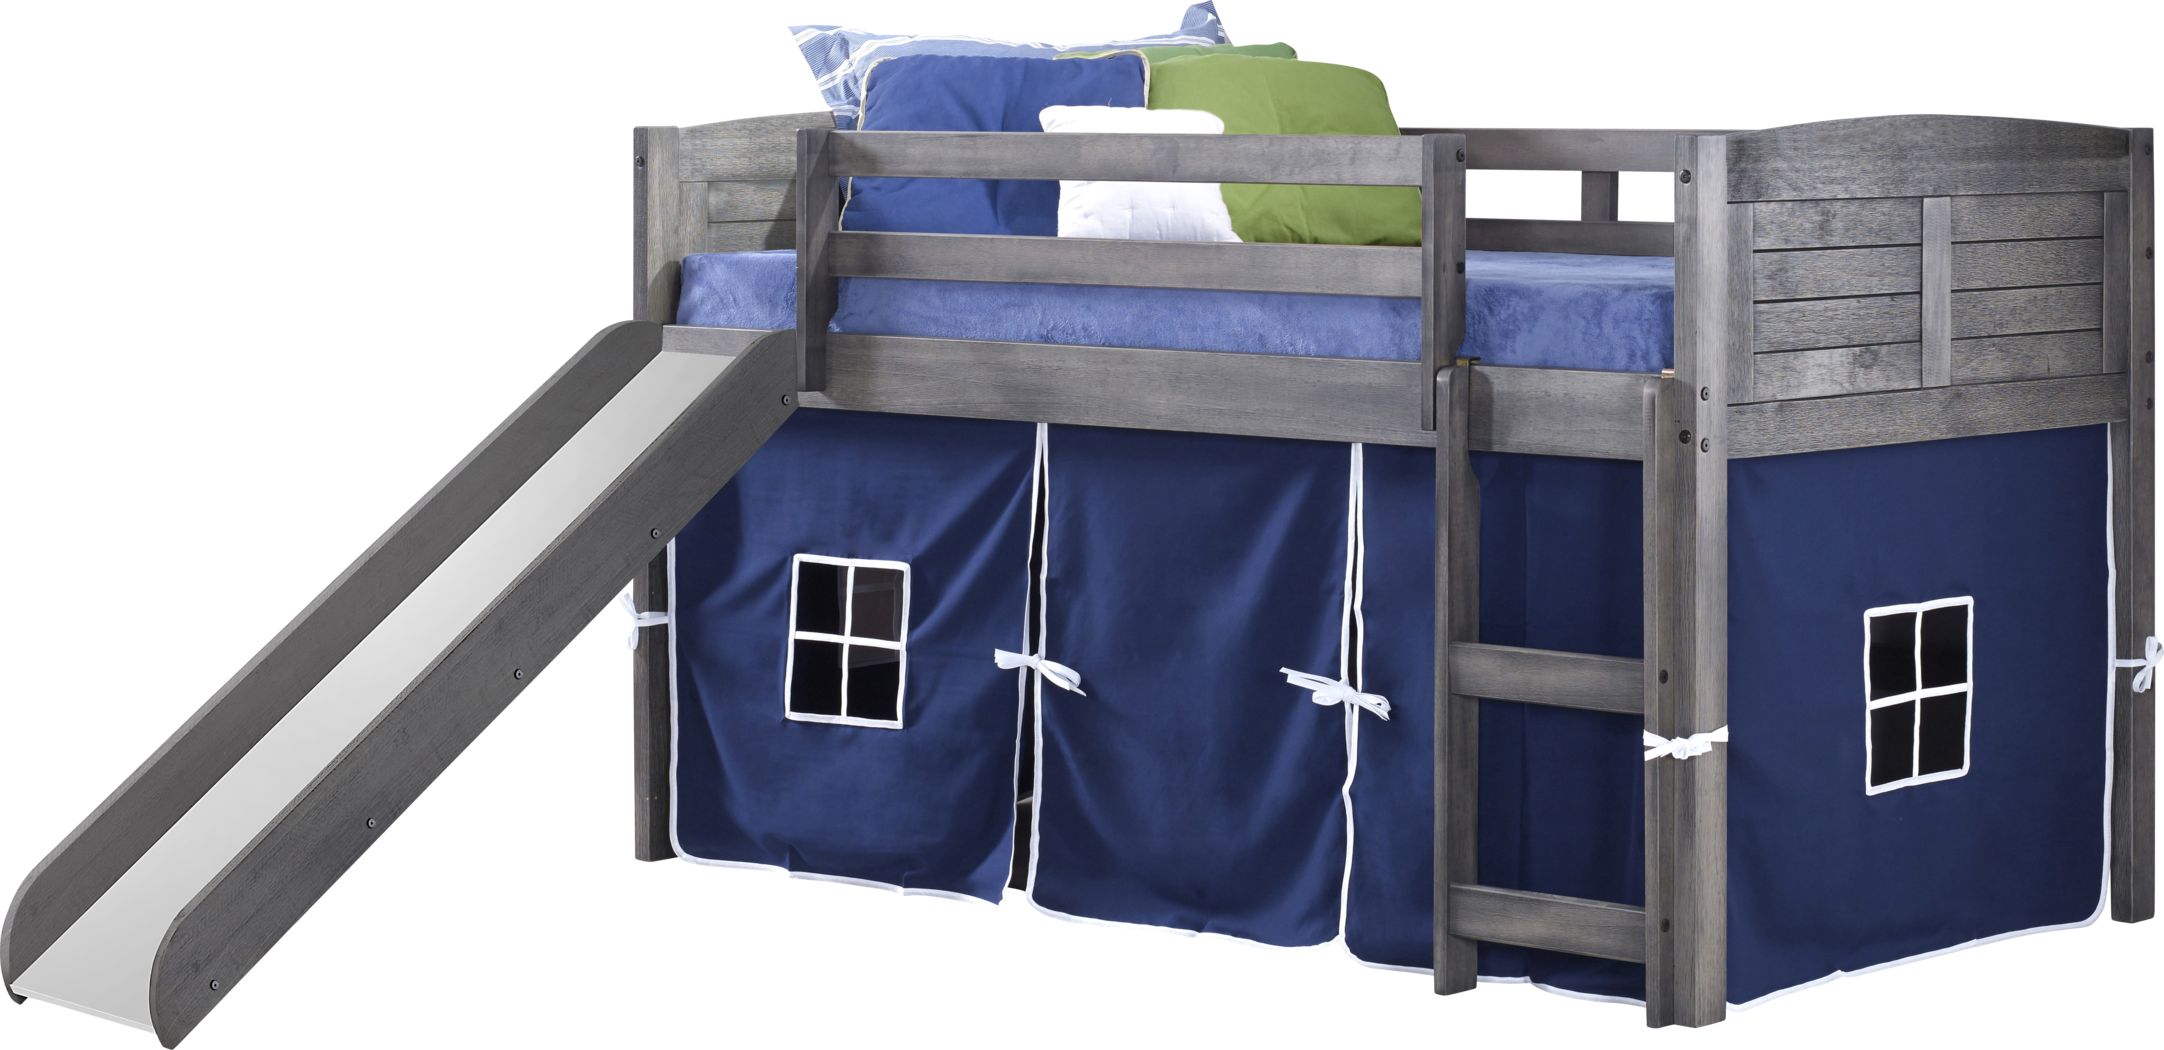 Loft Beds With Slide Underneath, Junior Bunk Bed With Stairs